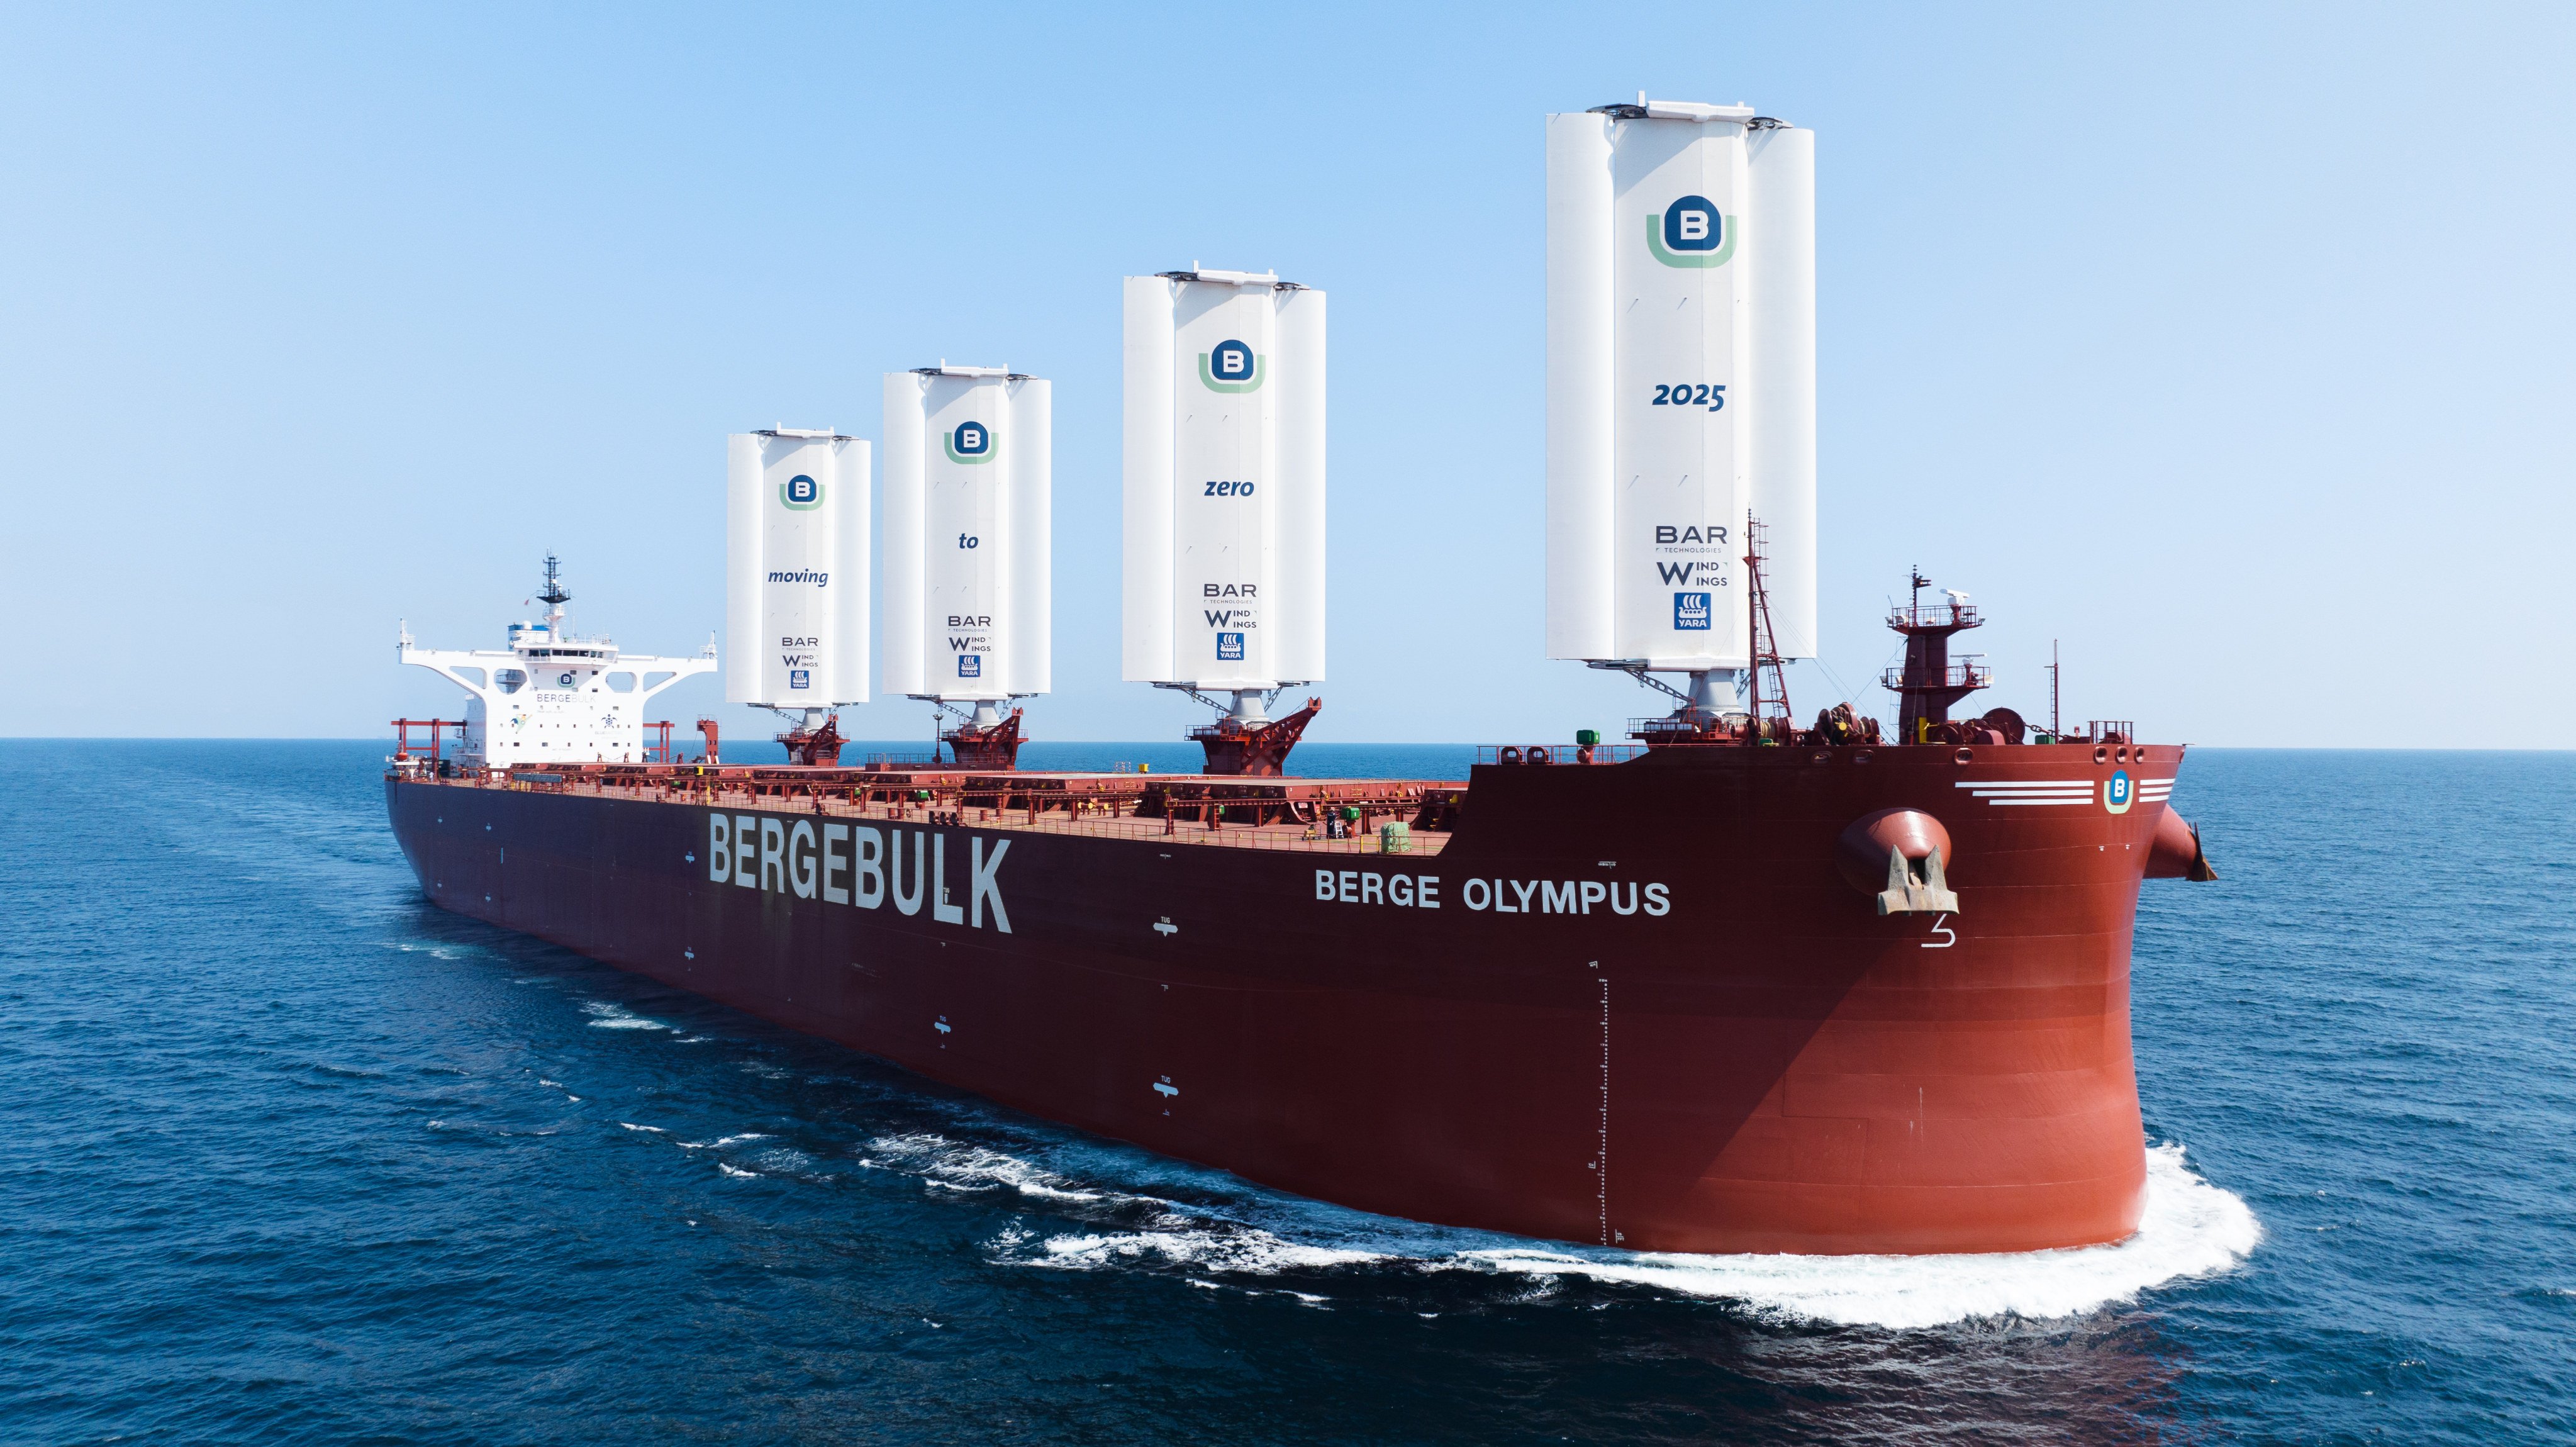 The Berge Olympus, a dry bulk vessel, has been retrofitted with wind-assisted propulsion equipment for reducing carbon emissions. Photo: Handout